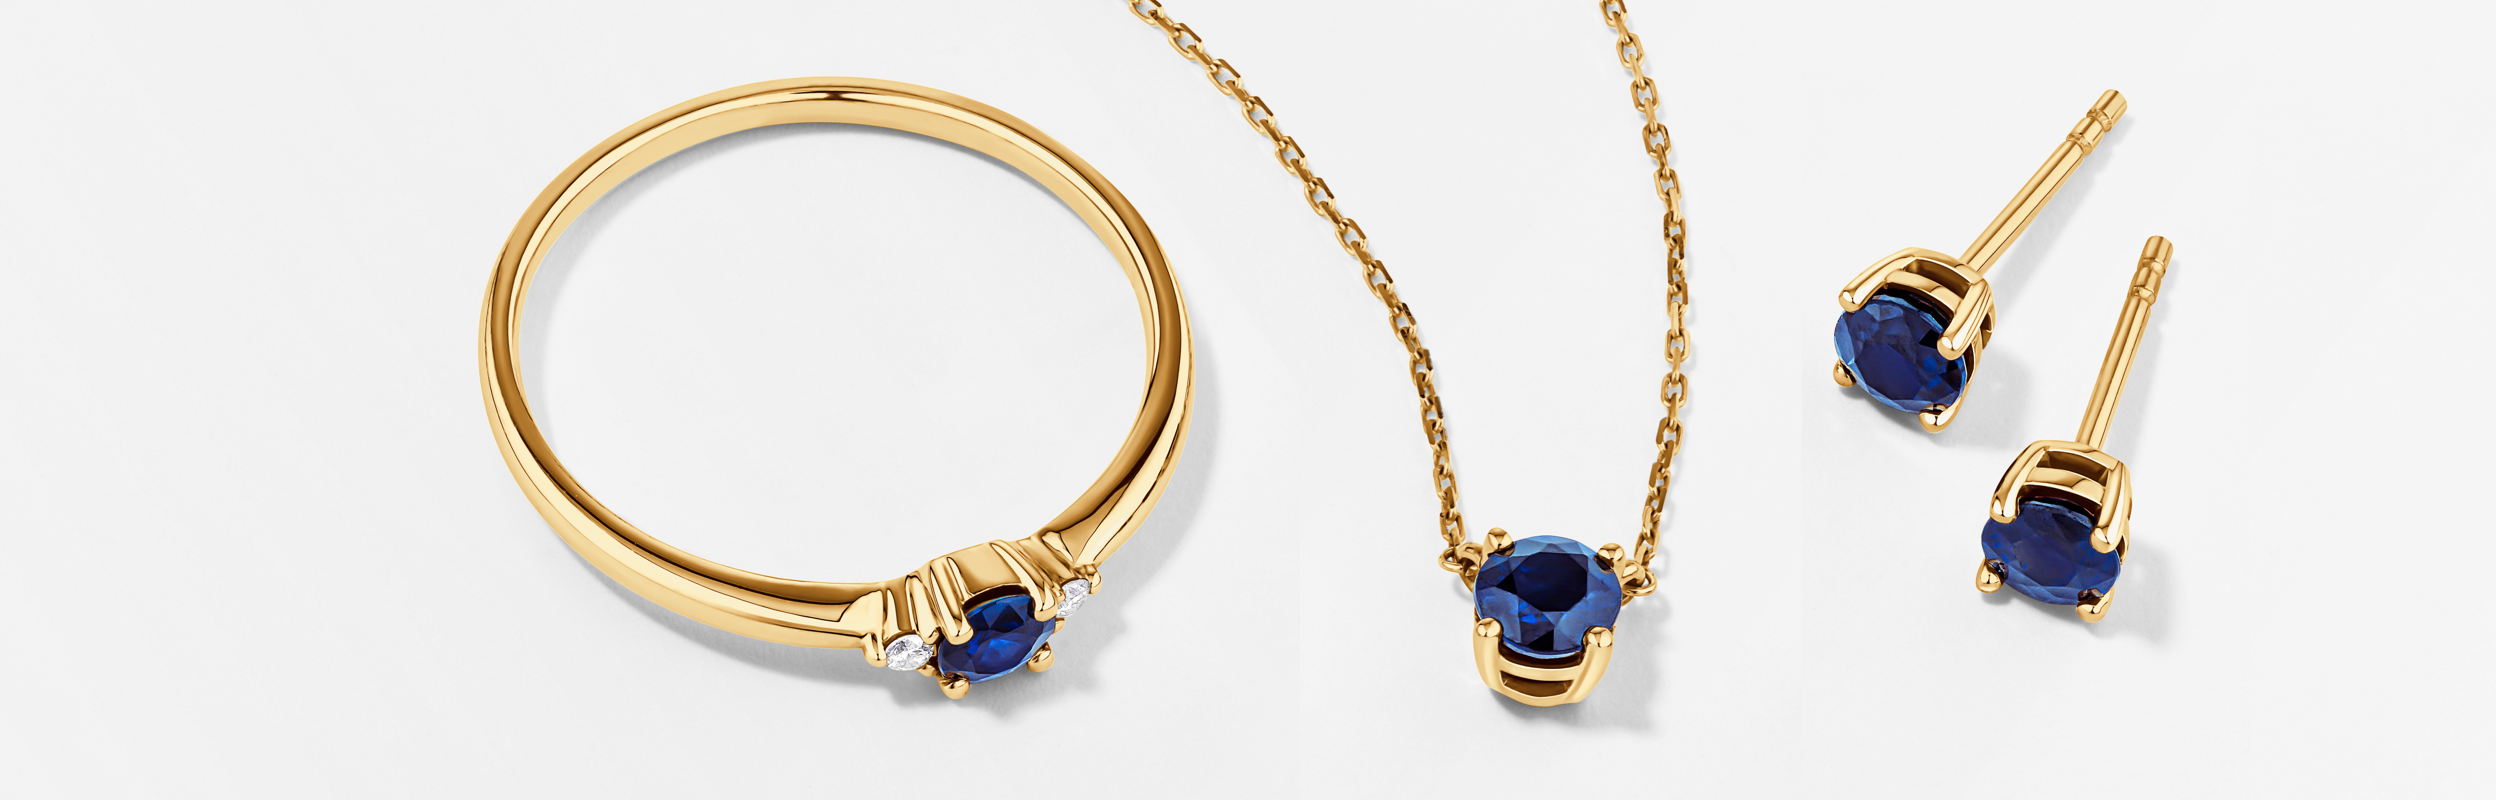 september birthstone sapphire necklace ring earrings in gold